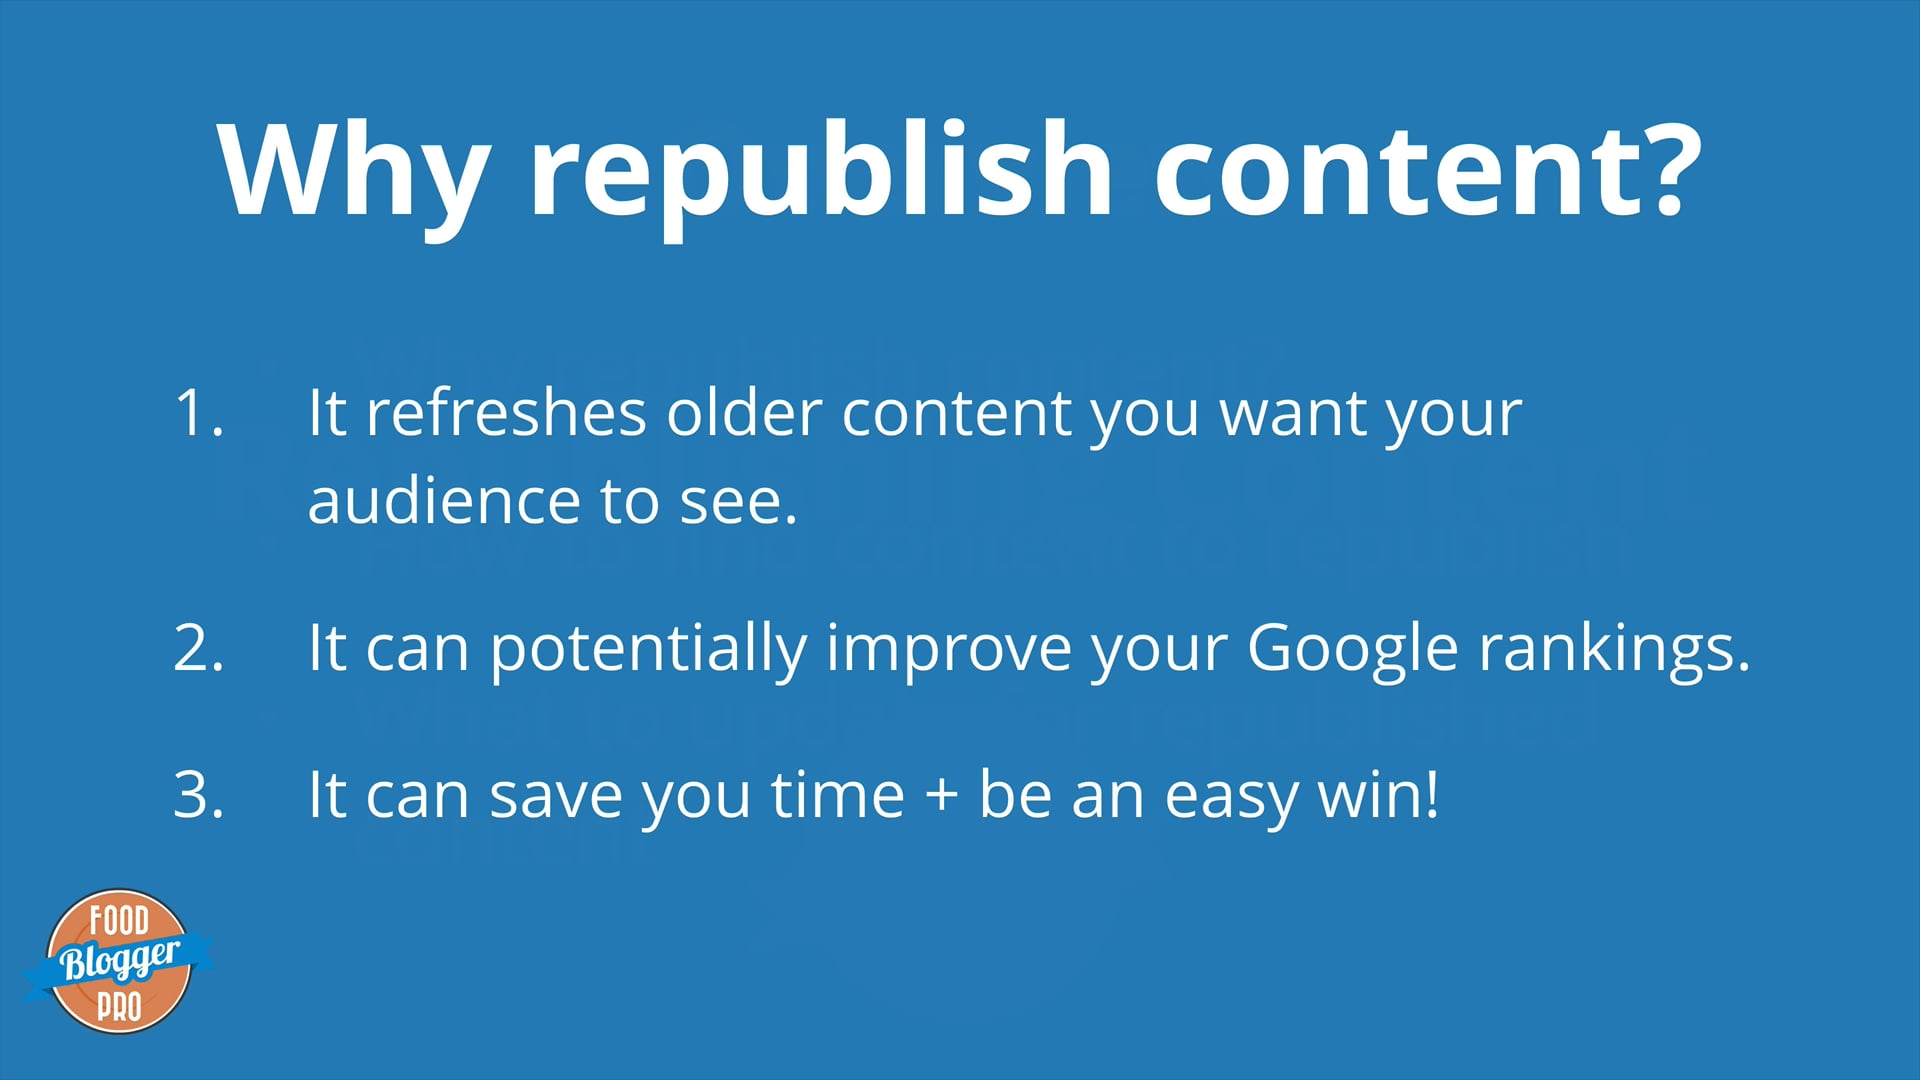 Reasons to republish content as part of the Food Blogger Pro course on Updating Old Content